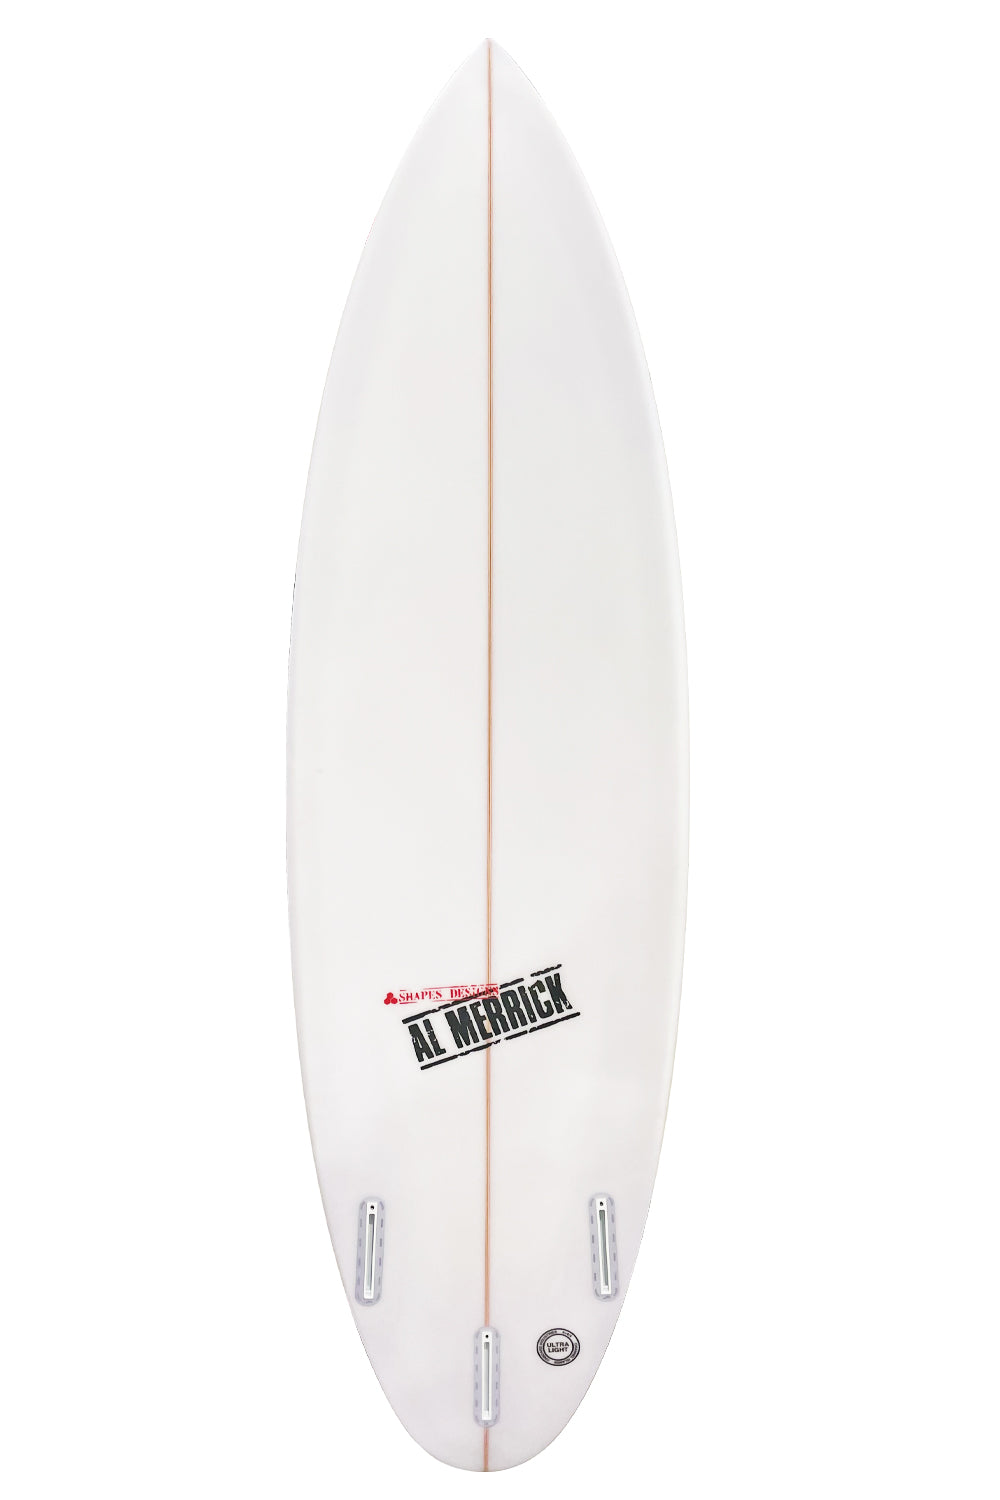 Channel Islands CI Pro Surfboard - Round Tail